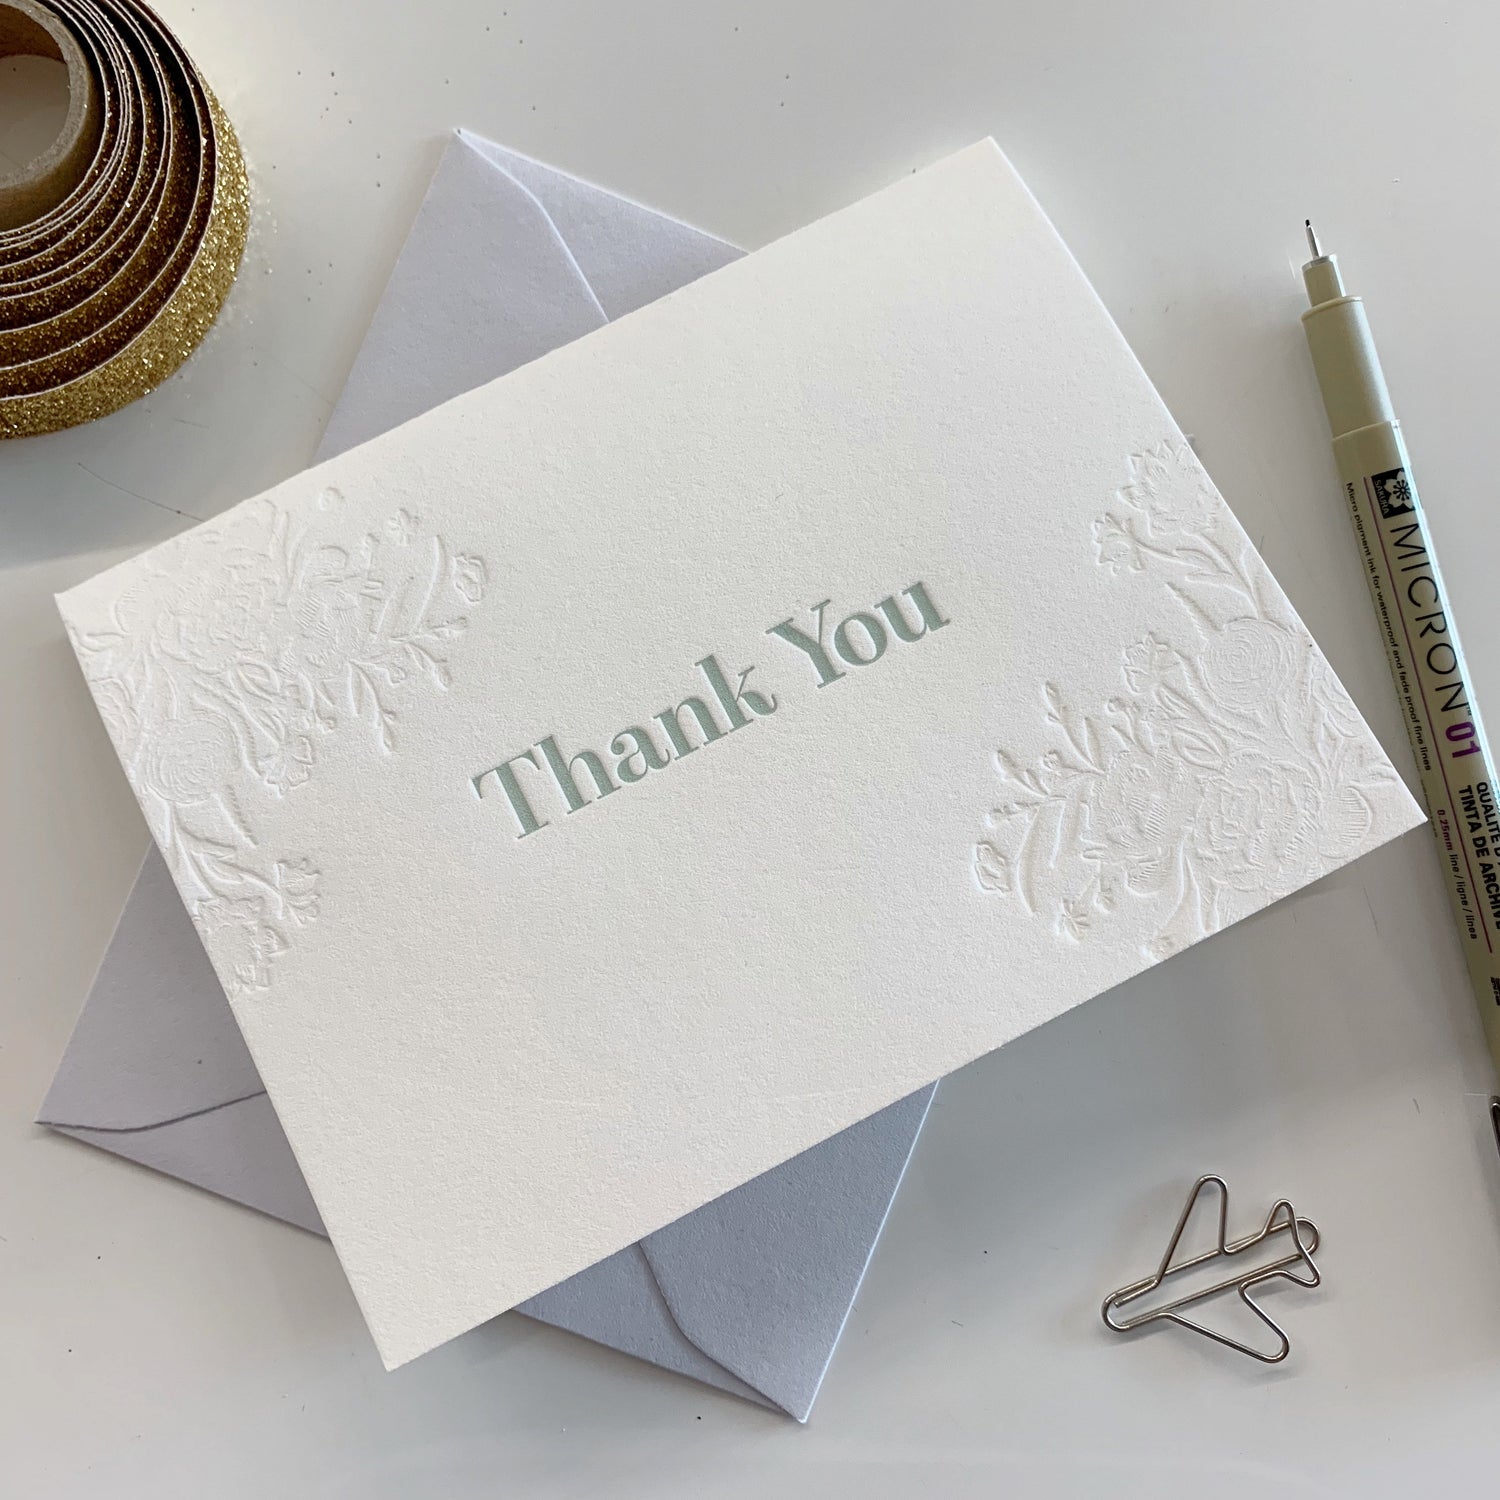 Letterpress thank you card with blind florals that says "Thank You" by Rust Belt Love